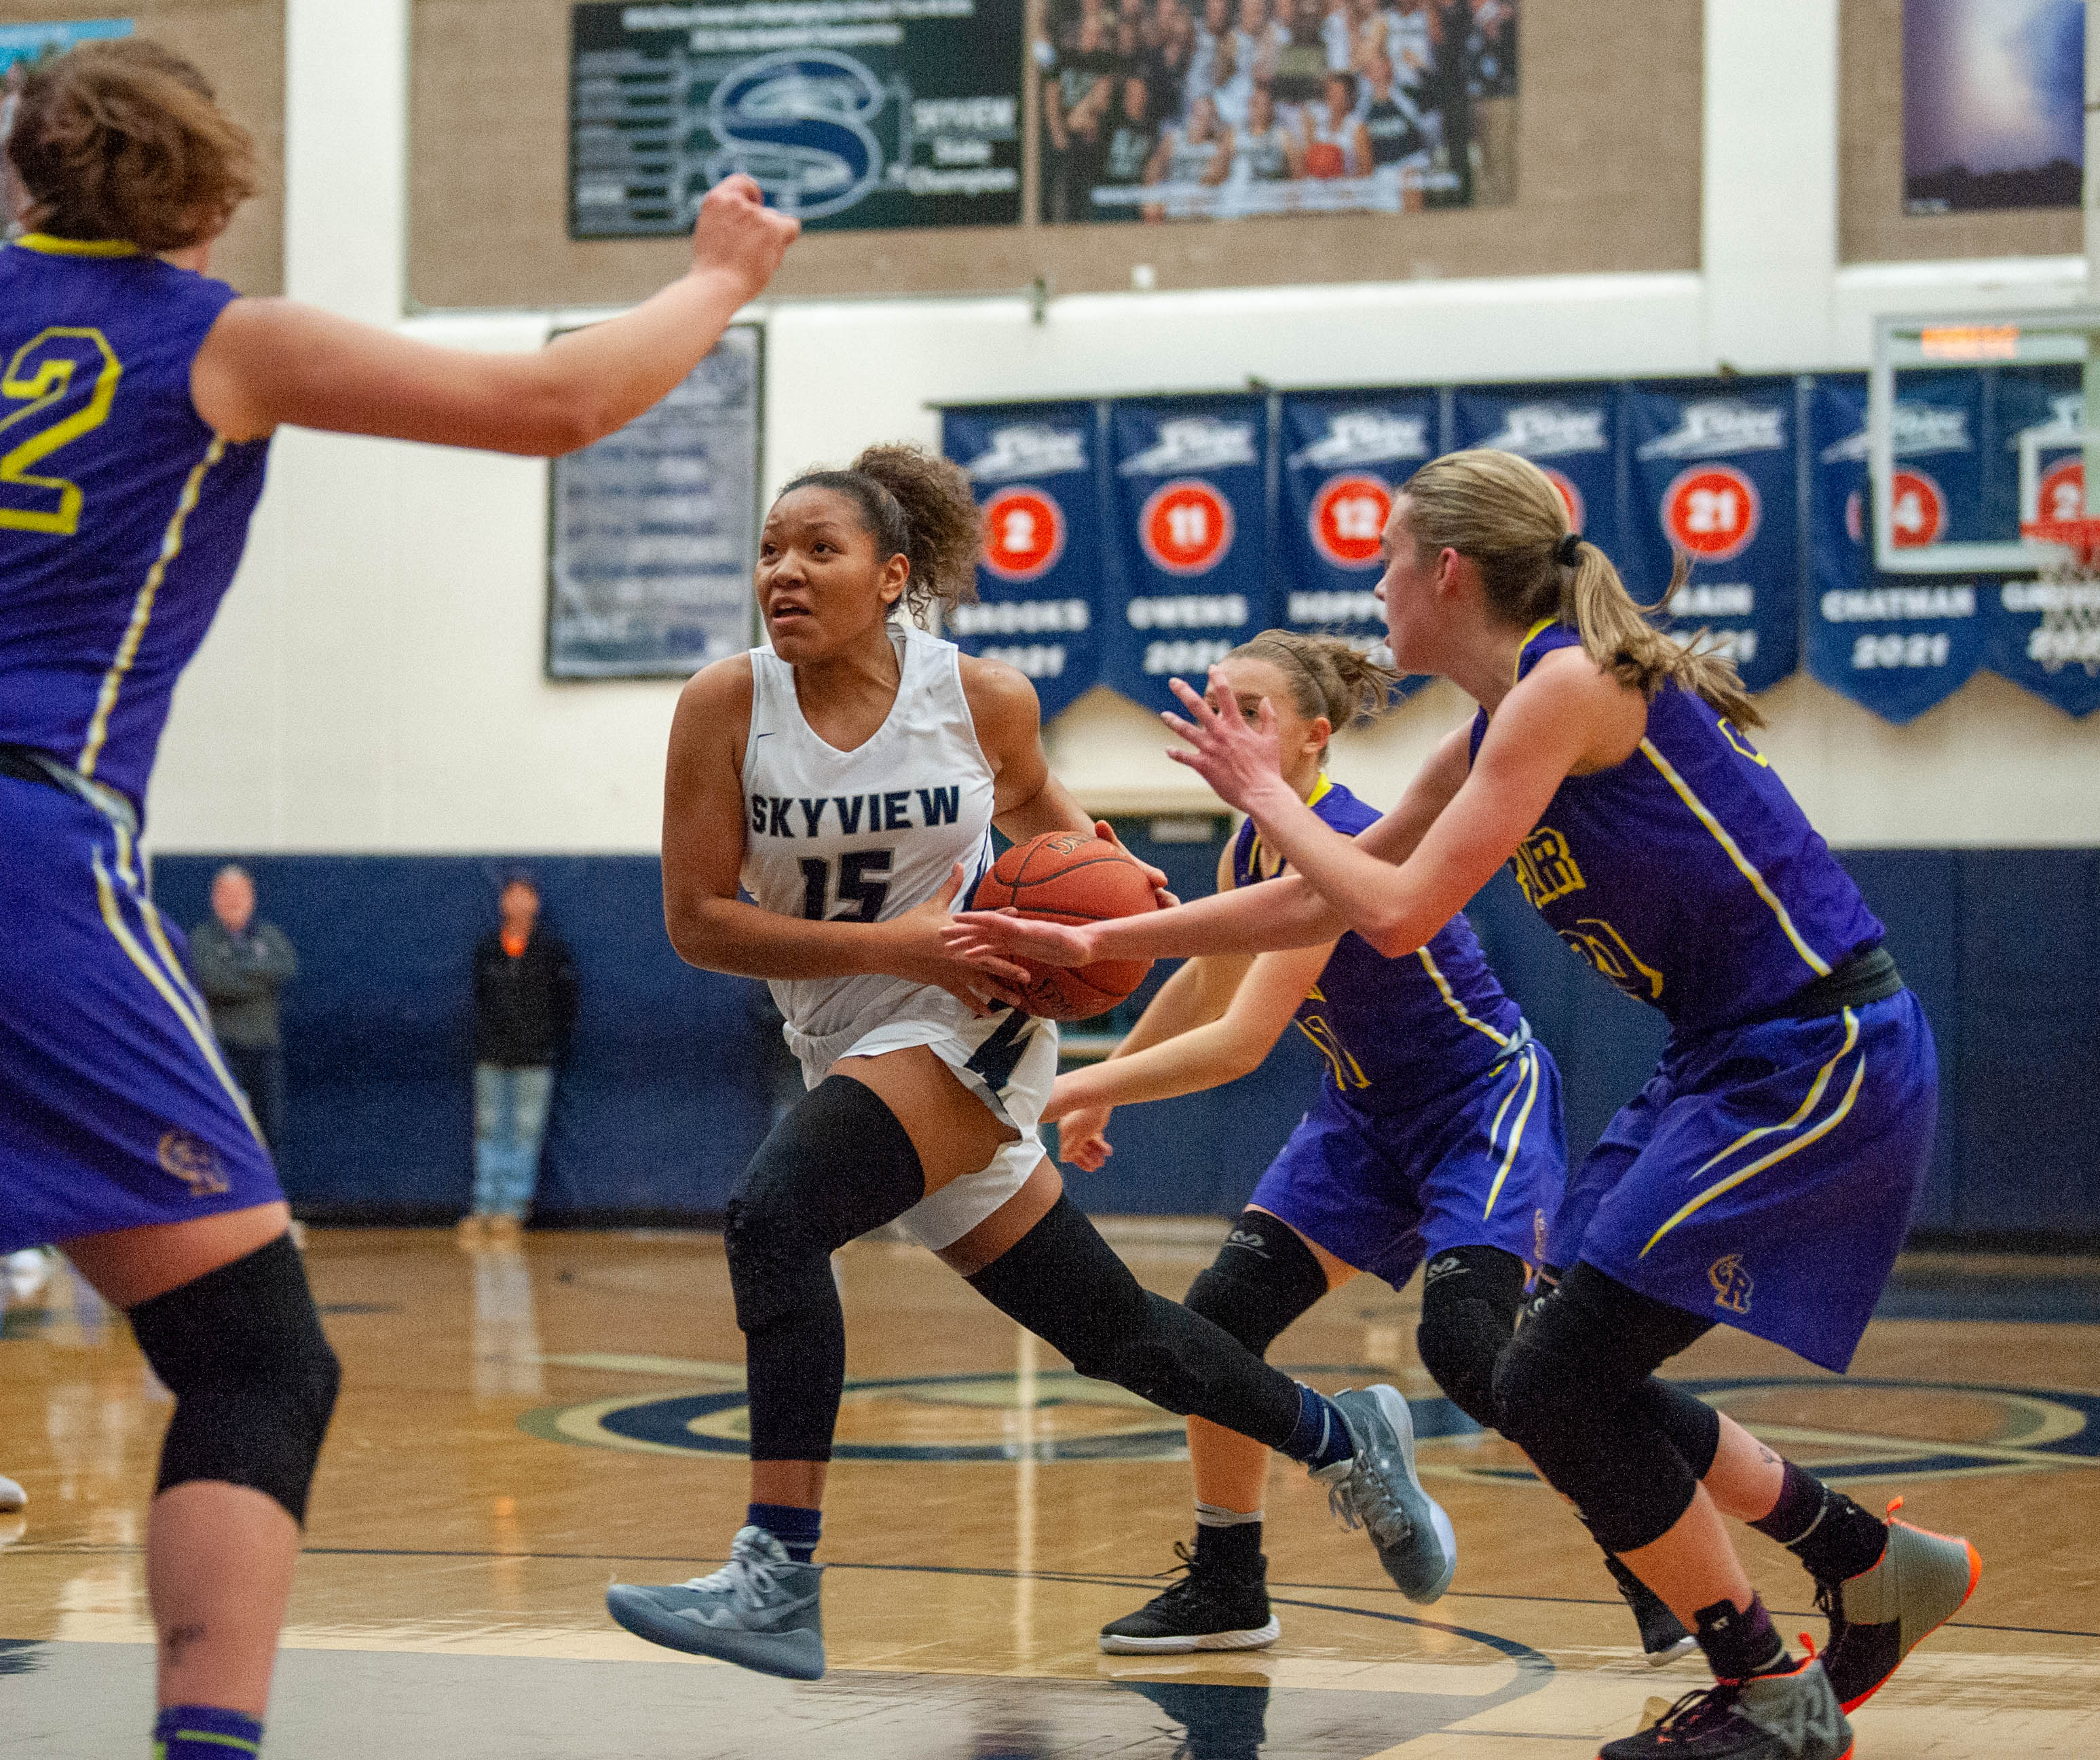 Skyview's Kazz Parks drives through the Columbia River defense.